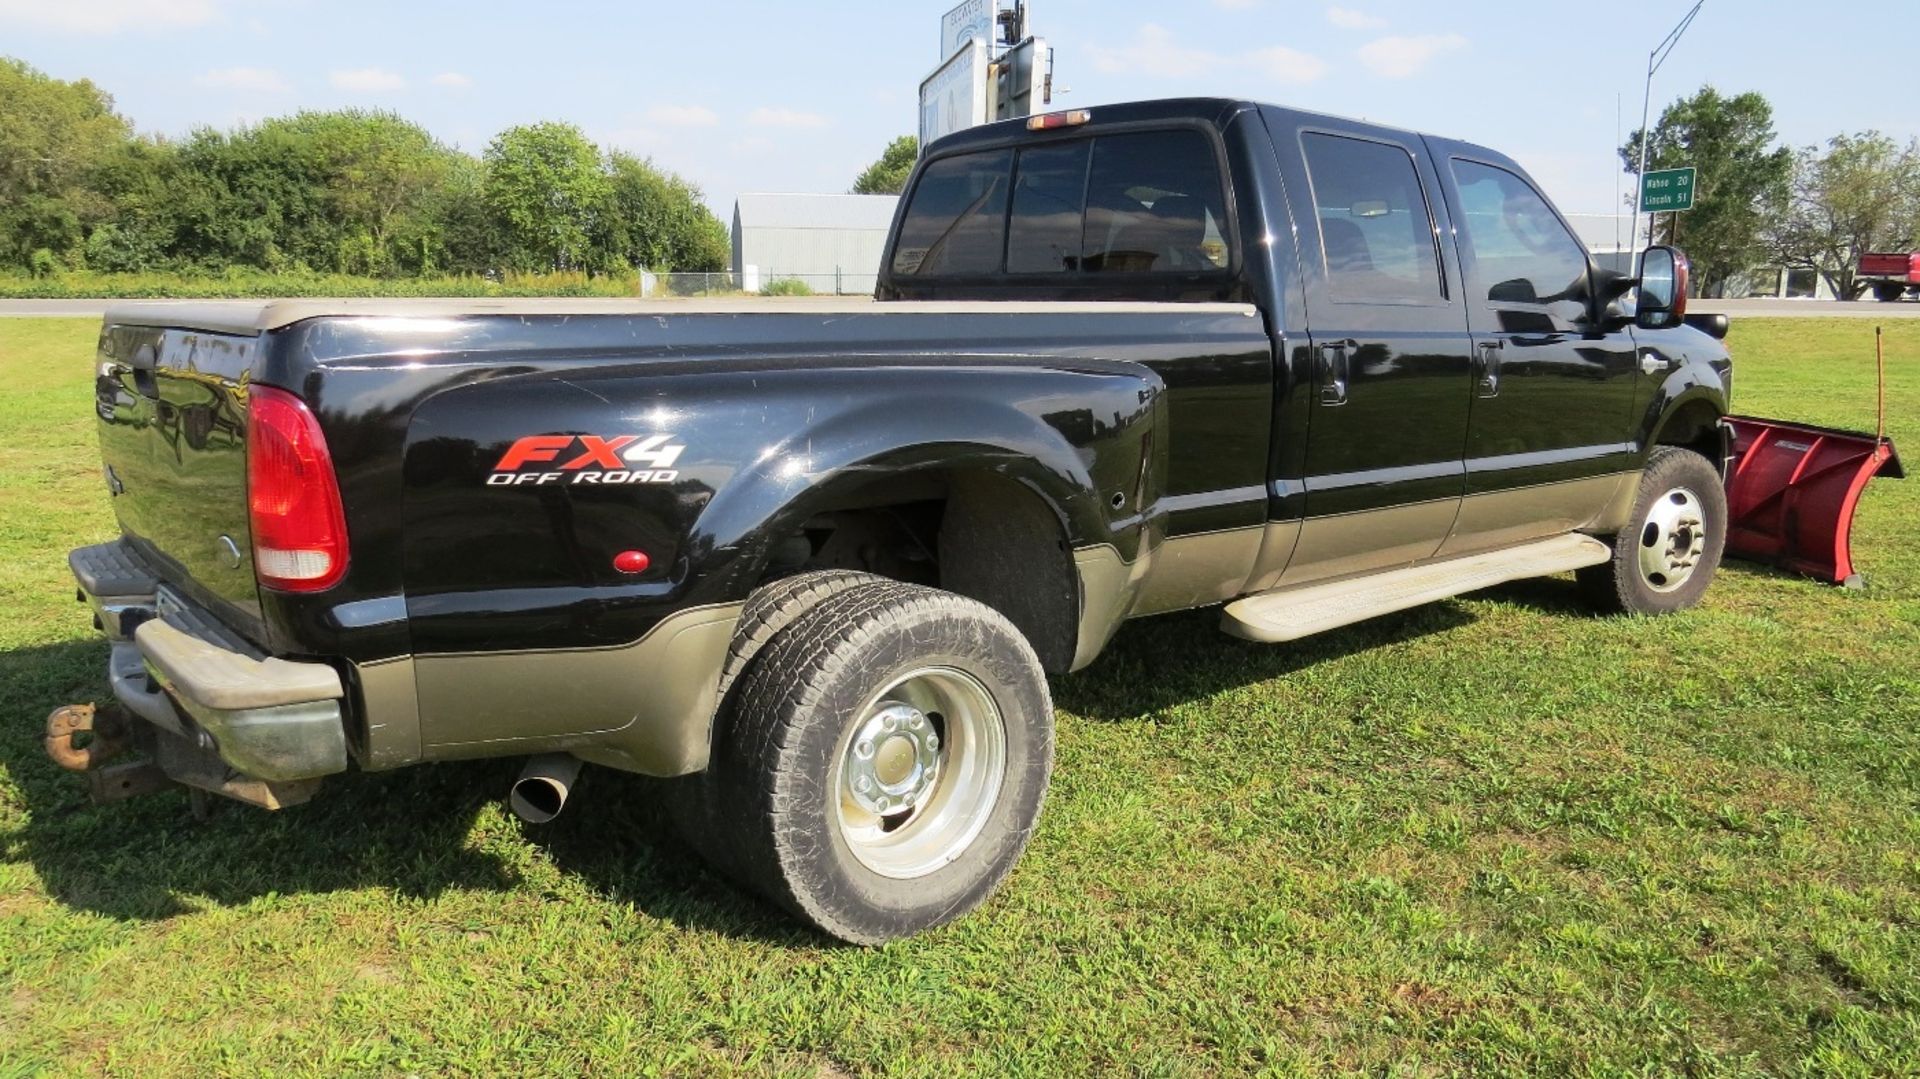 2006 Ford Model F-350 Lariat King Ranch Crew Cab Dually Pickup, VIN# 1FTWW33P76EC50284, V-8 Power - Image 24 of 30